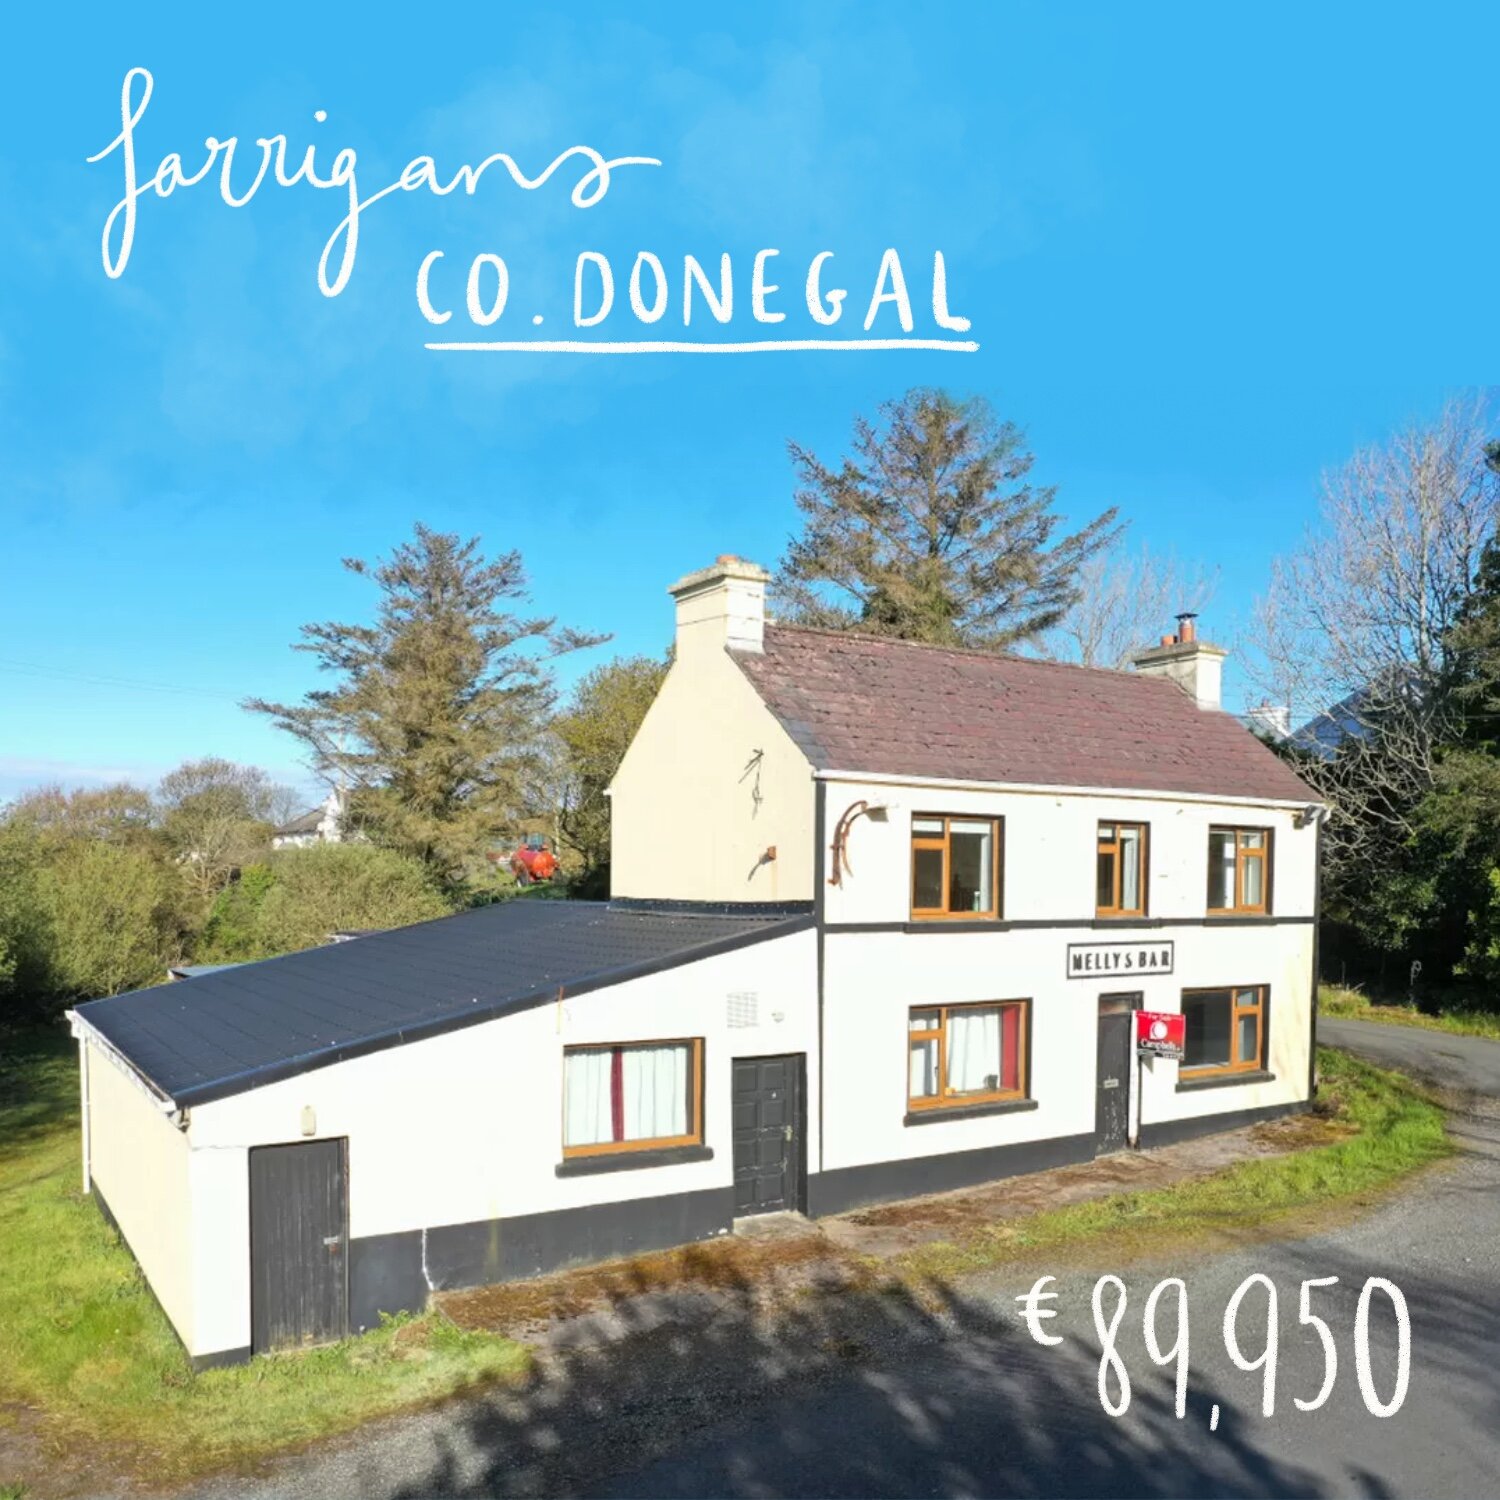 Farrigans, Lettermacaward, Co. Donegal. €89,950